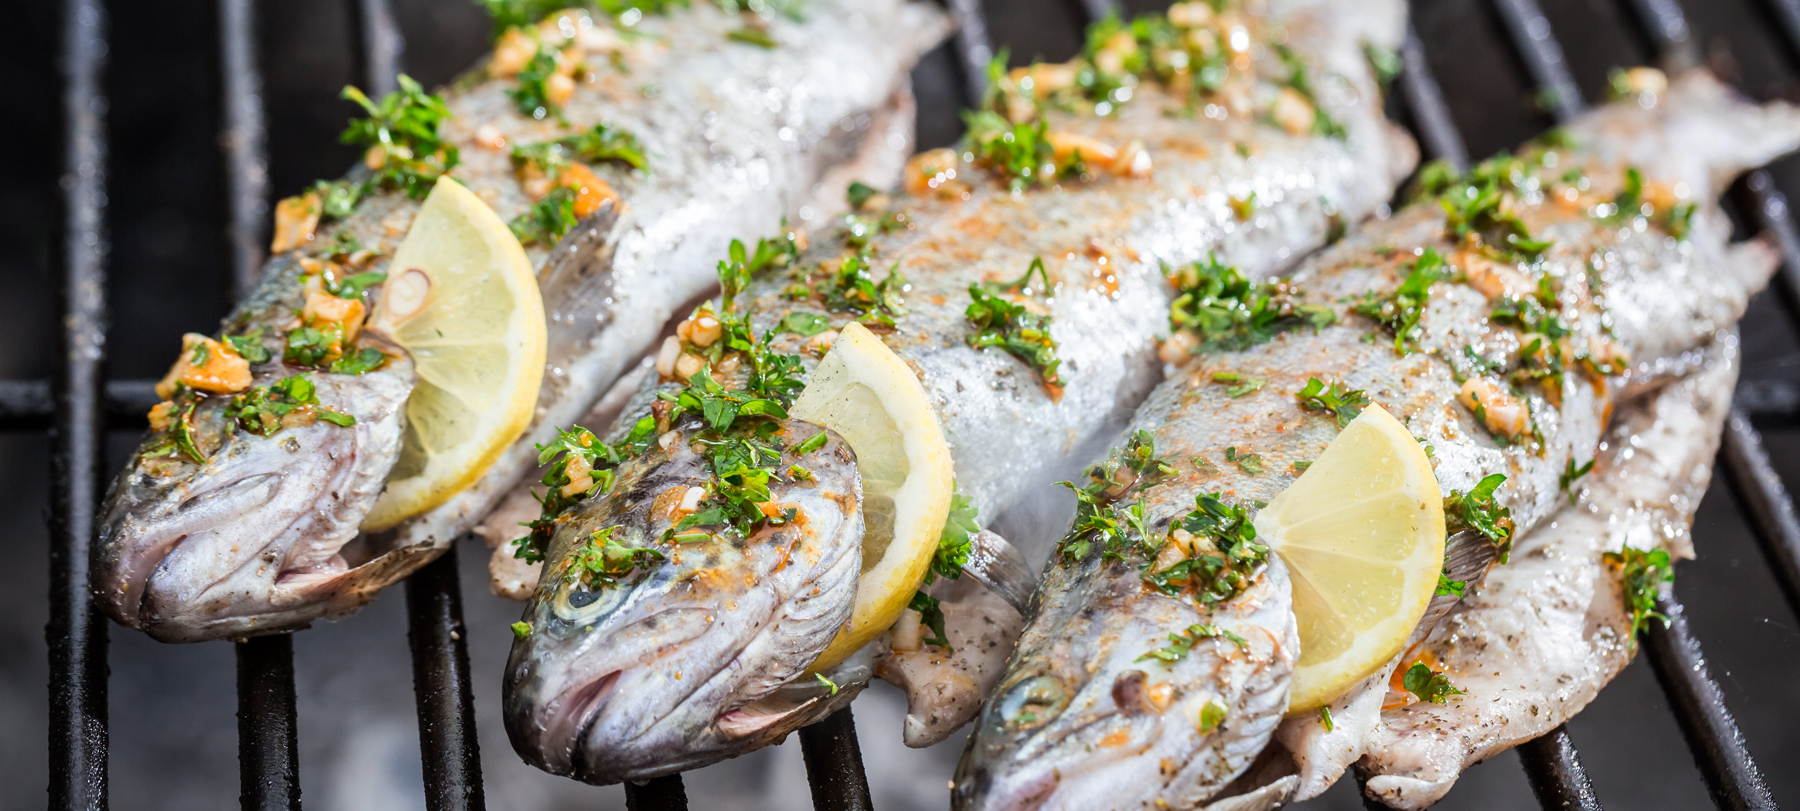 grilled-fish-with-lemon-and-spices-on-grill